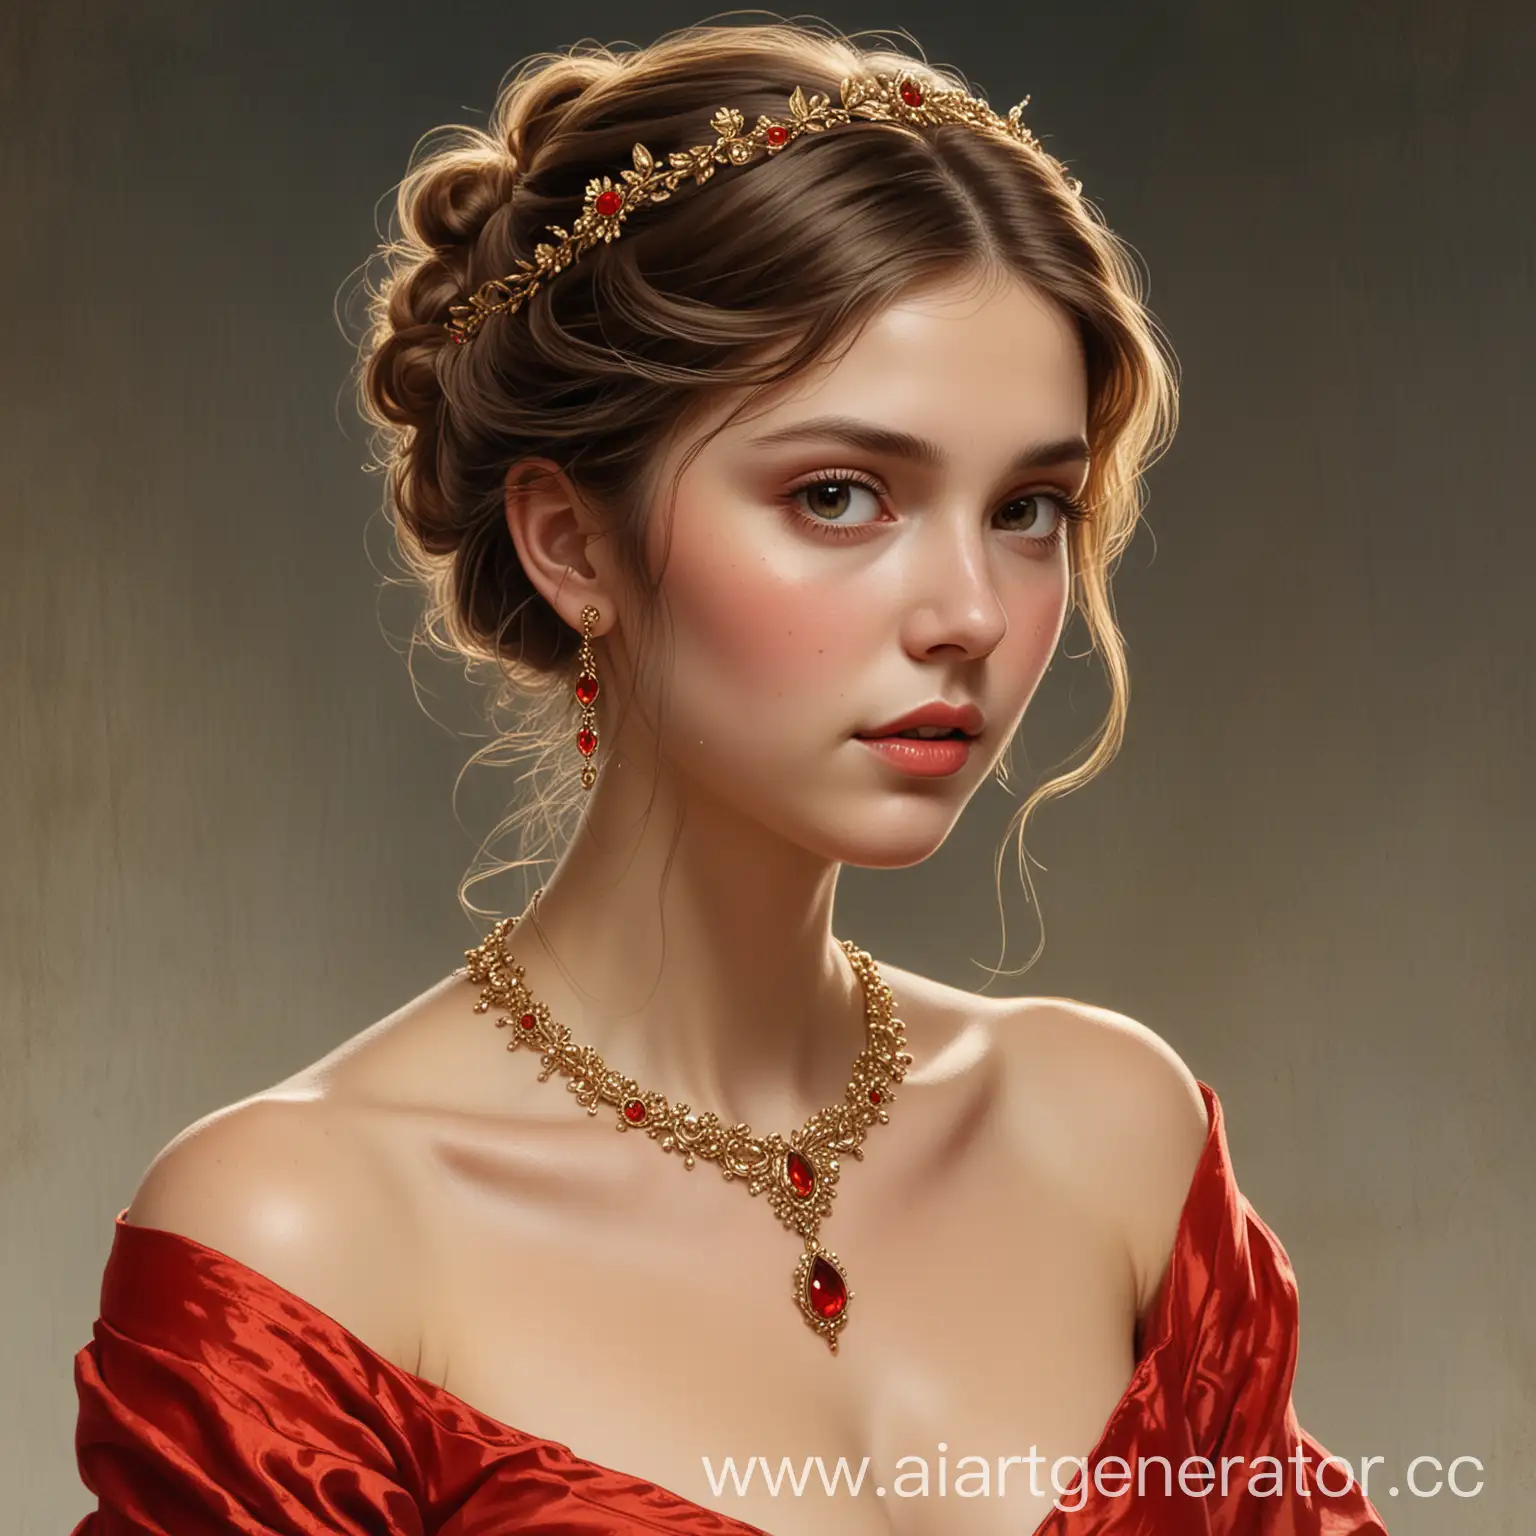 Gentle-Fairy-Tale-Portrait-of-Woman-in-Red-Dress-with-Golden-Jewelry